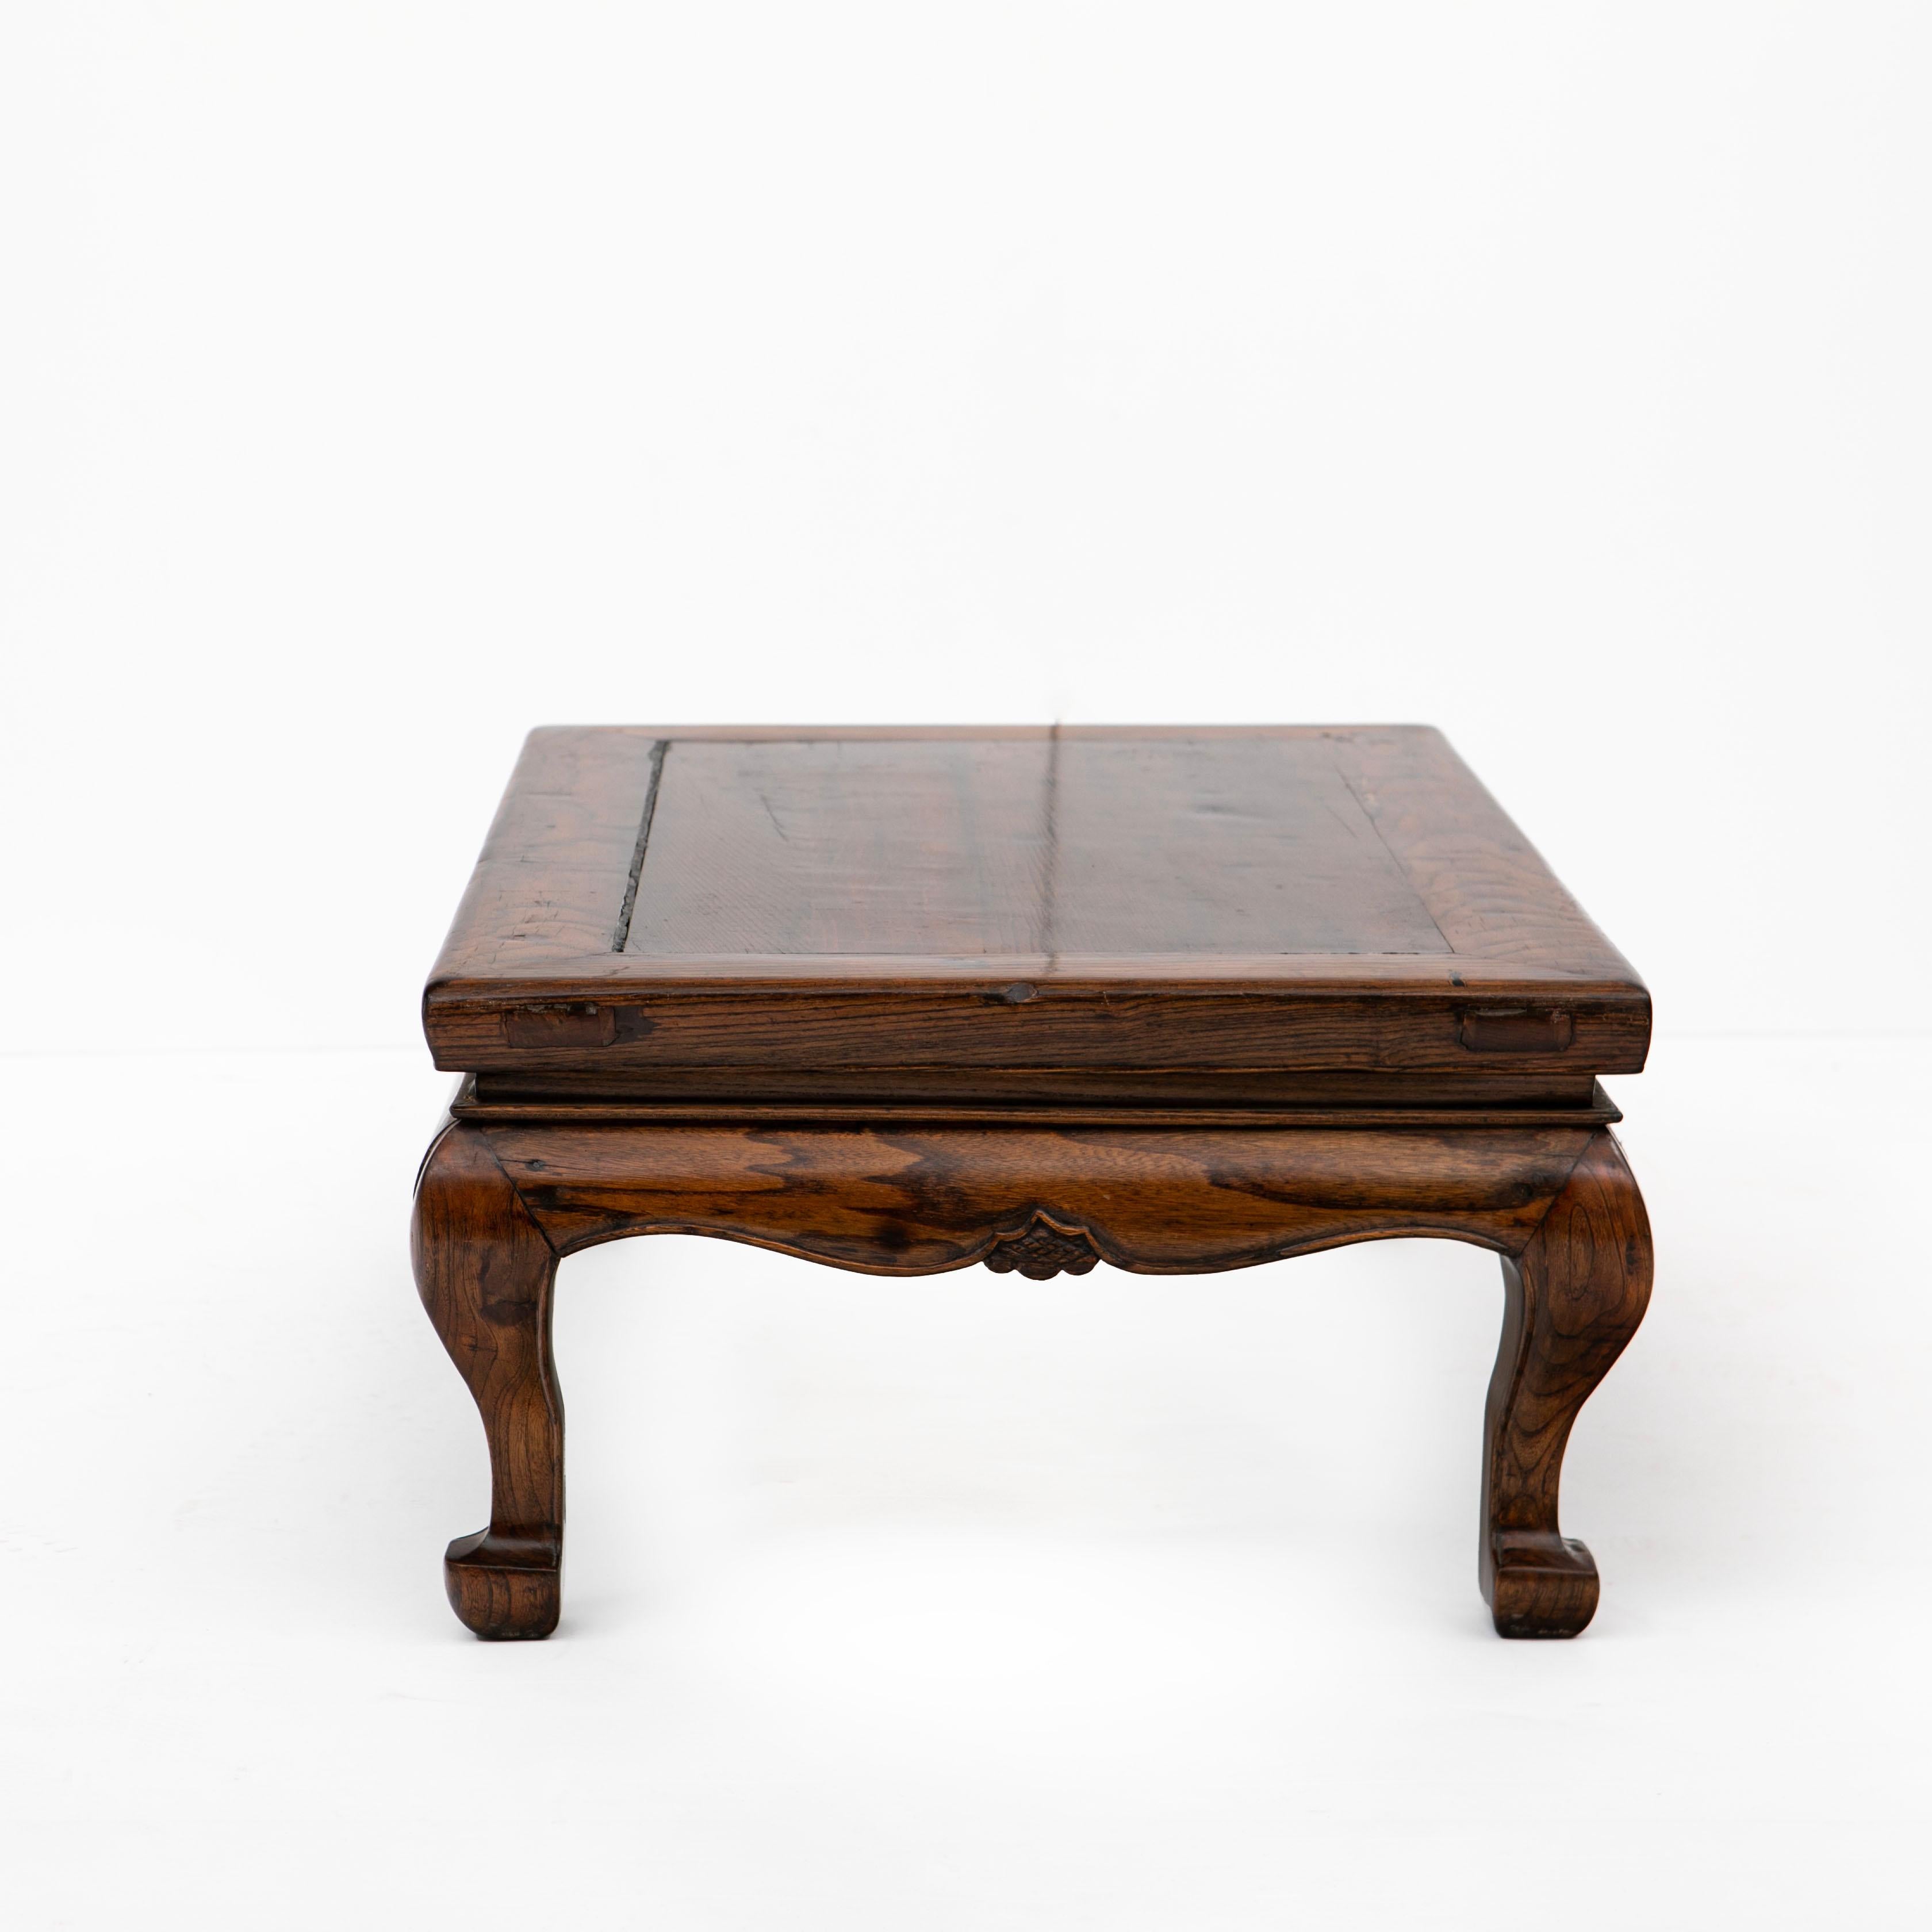 20th Century Chinese Mid 19th Century Qing Dynasty Kang Table For Sale